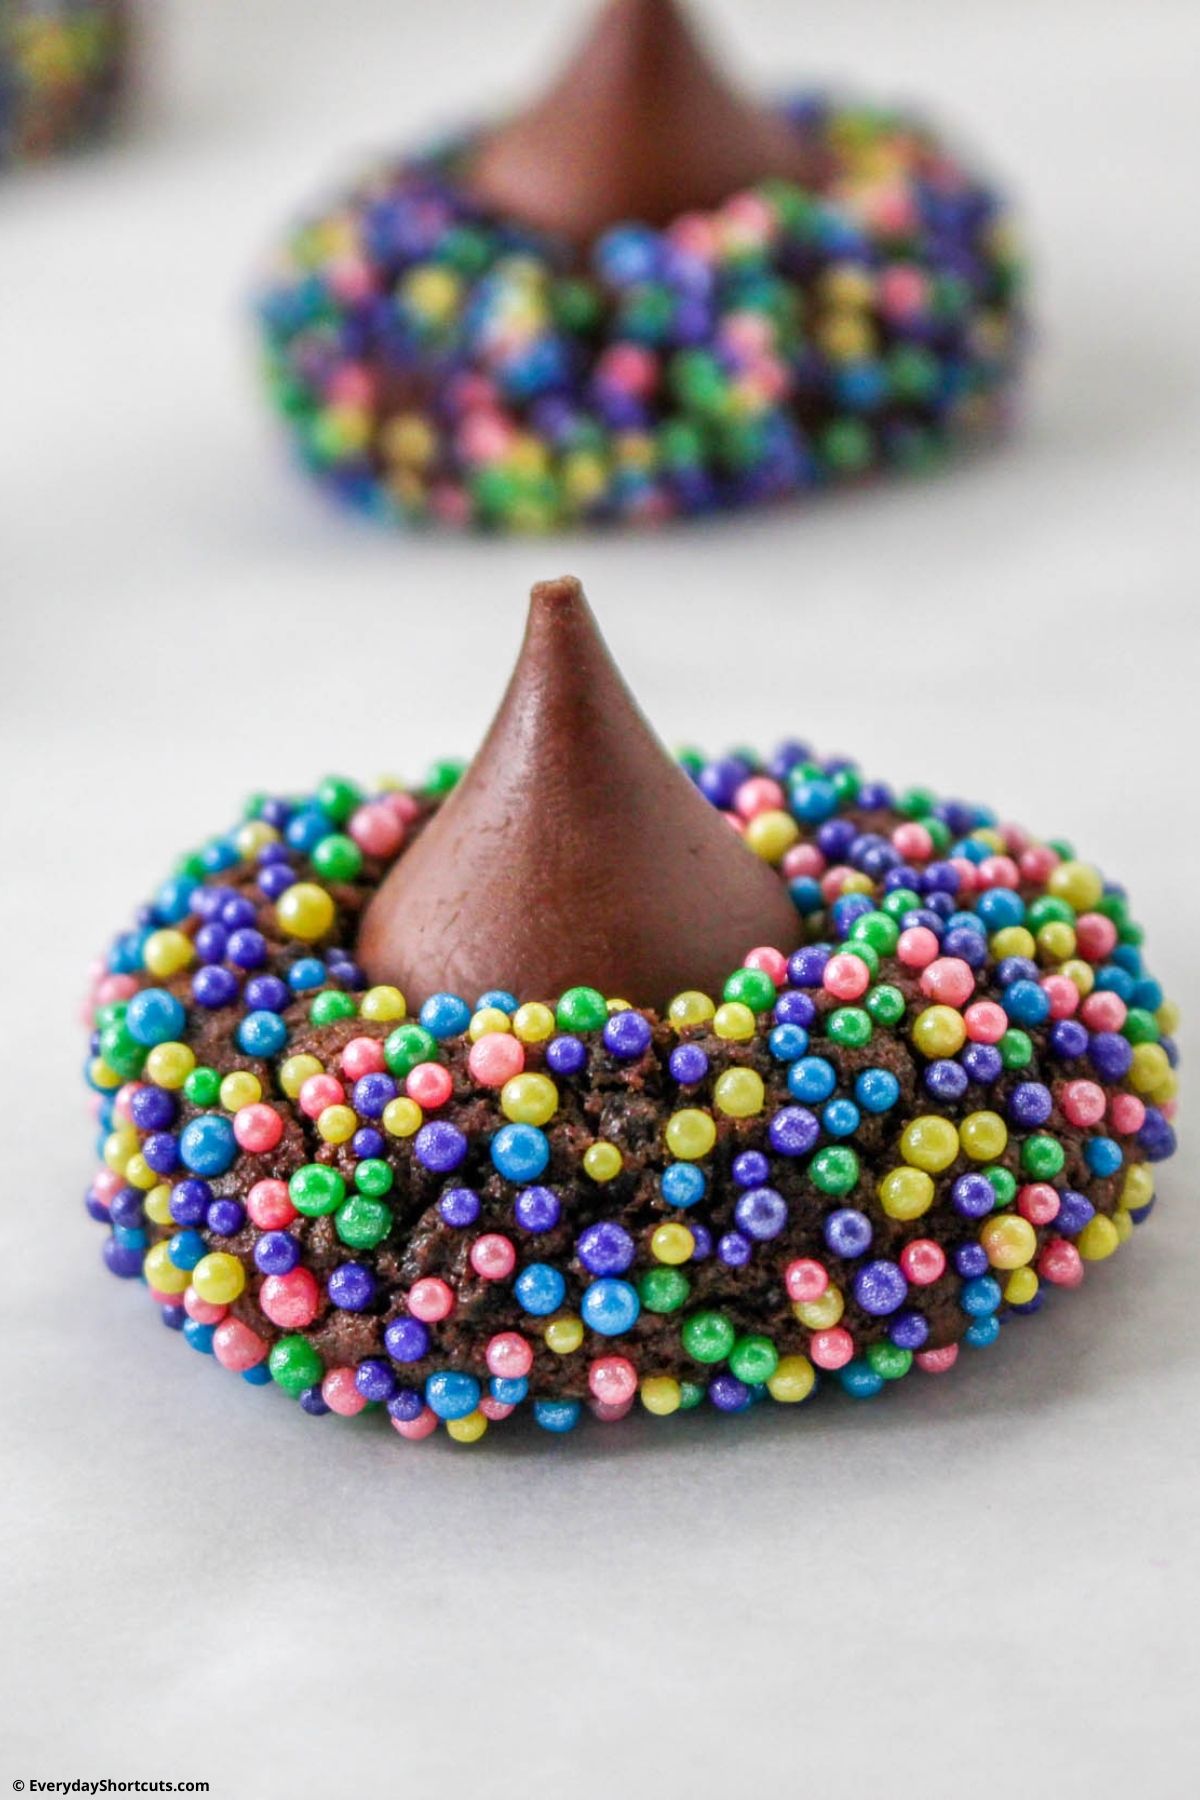 baked chocolate sugar cookies with chocolate kiss in the middle